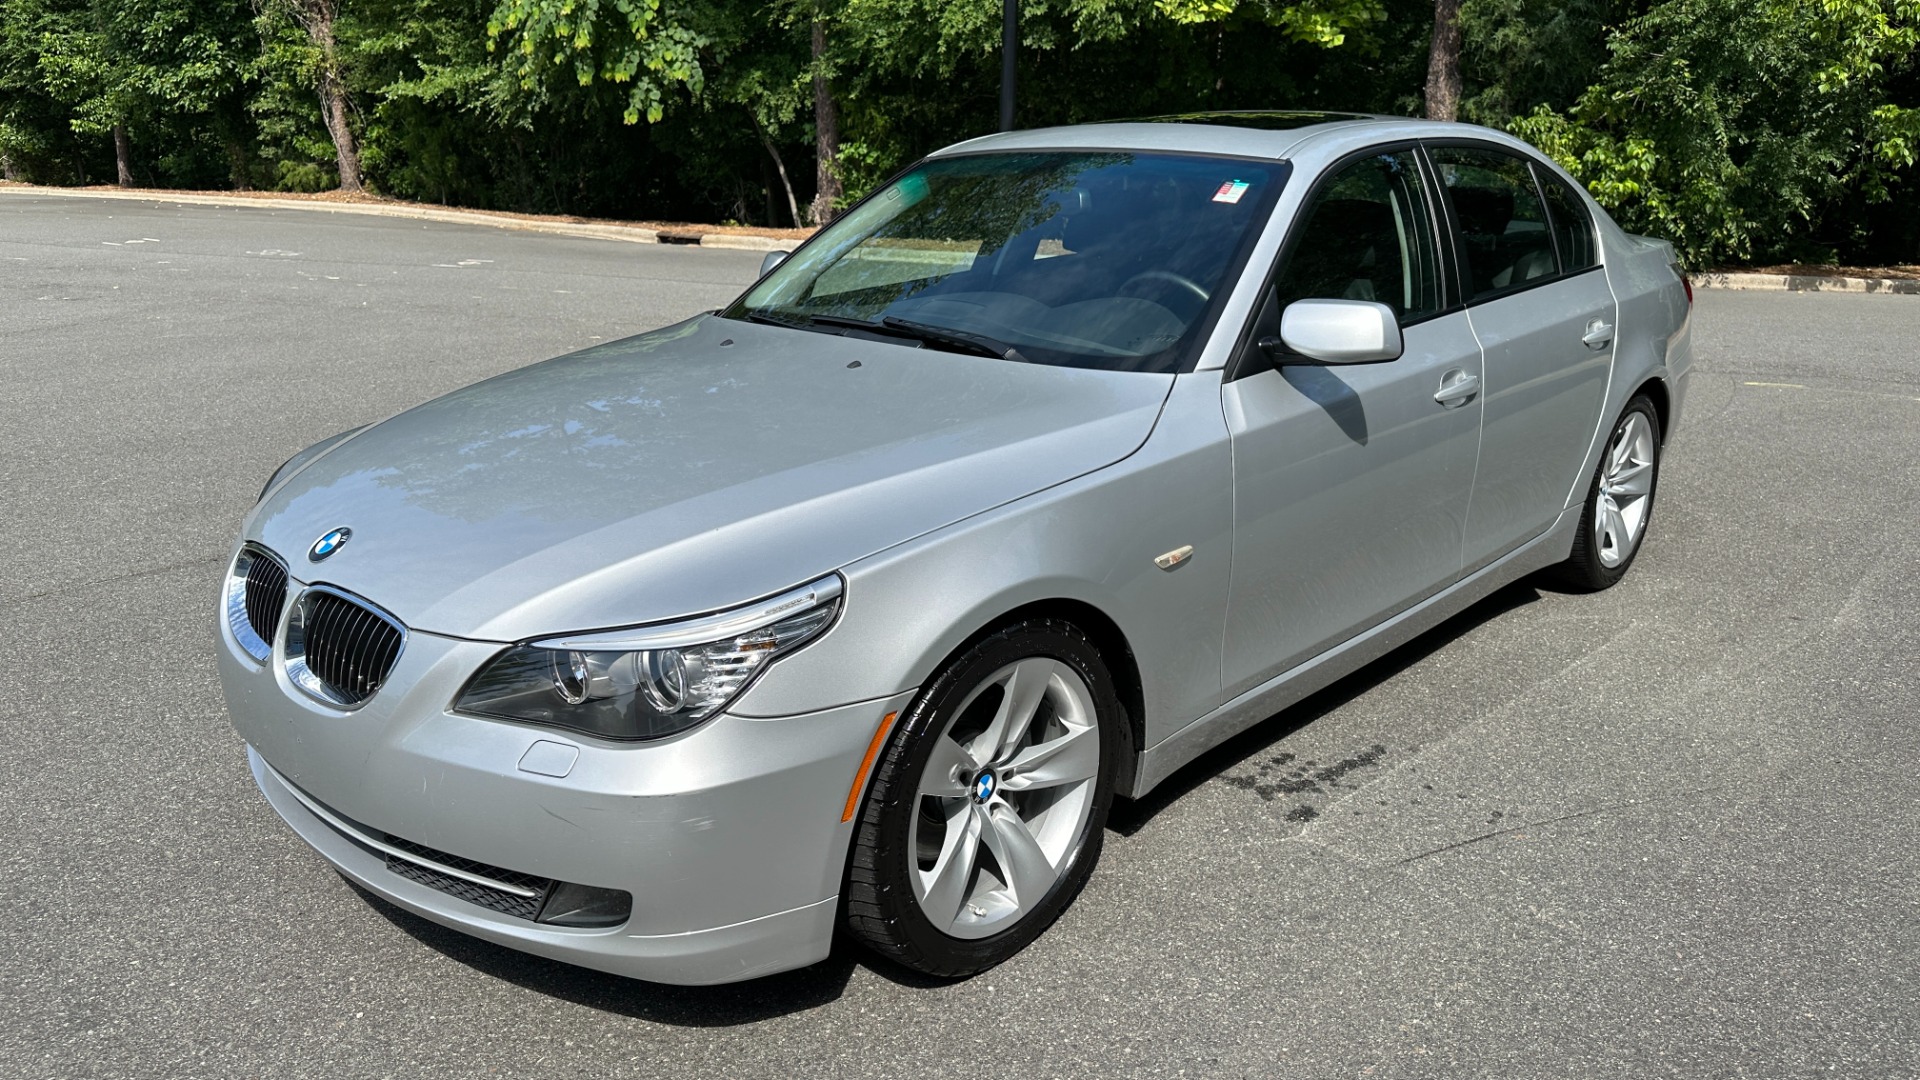 Used 2009 BMW 5 Series 528i / SPORT PACKAGE / PREMIUM PACKAGE / DAKOTA LEATHER for sale $14,995 at Formula Imports in Charlotte NC 28227 4